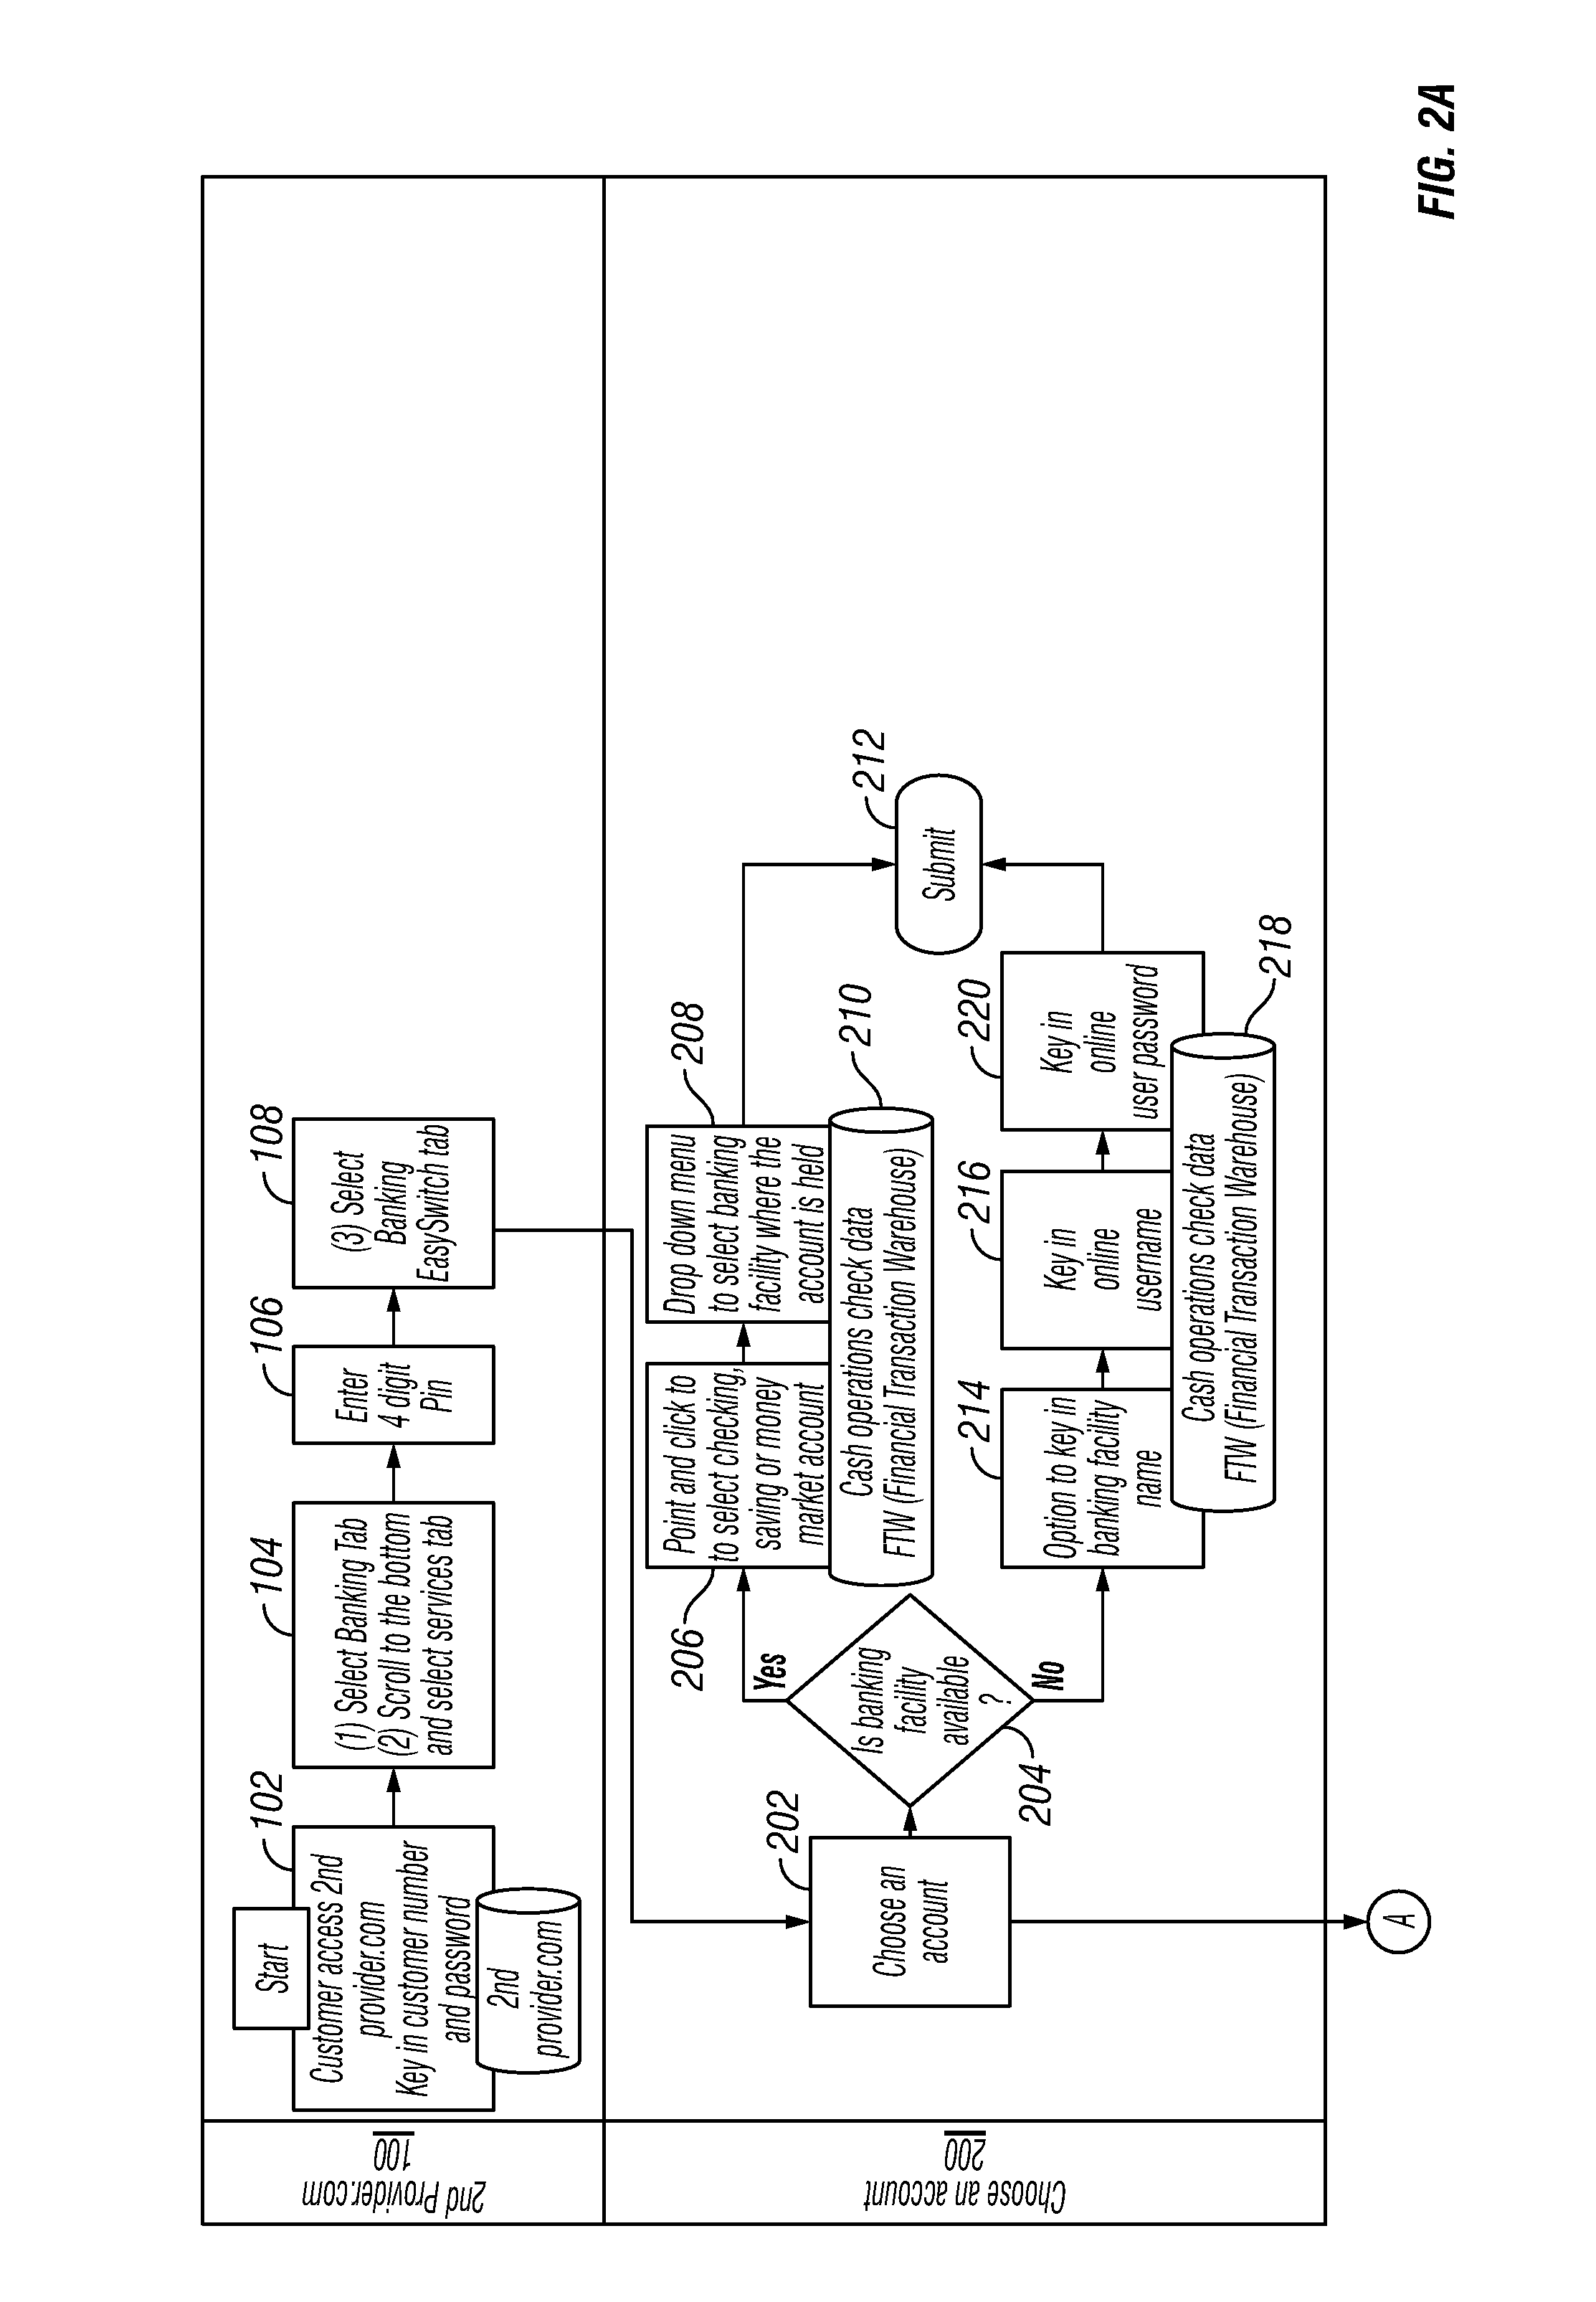 System and method for automated electronic switching of customer selected financial transactions for a customer banking account